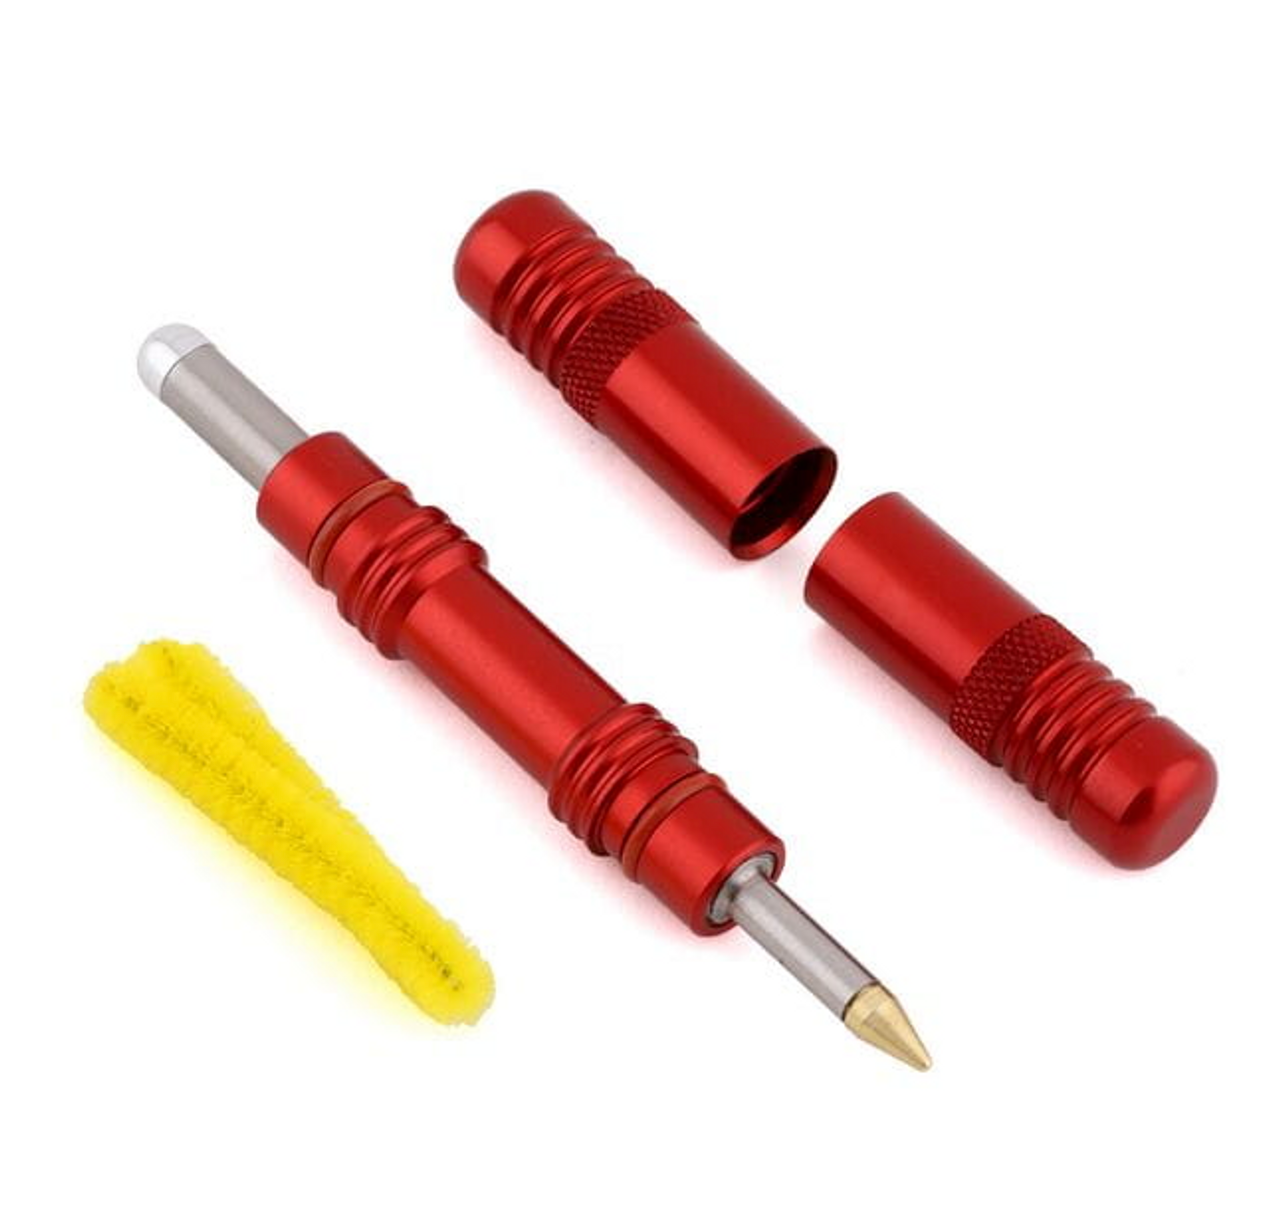 Dynaplug Racer Pro Tubeless Bicycle Tyre Repair Kit New Colours Added 